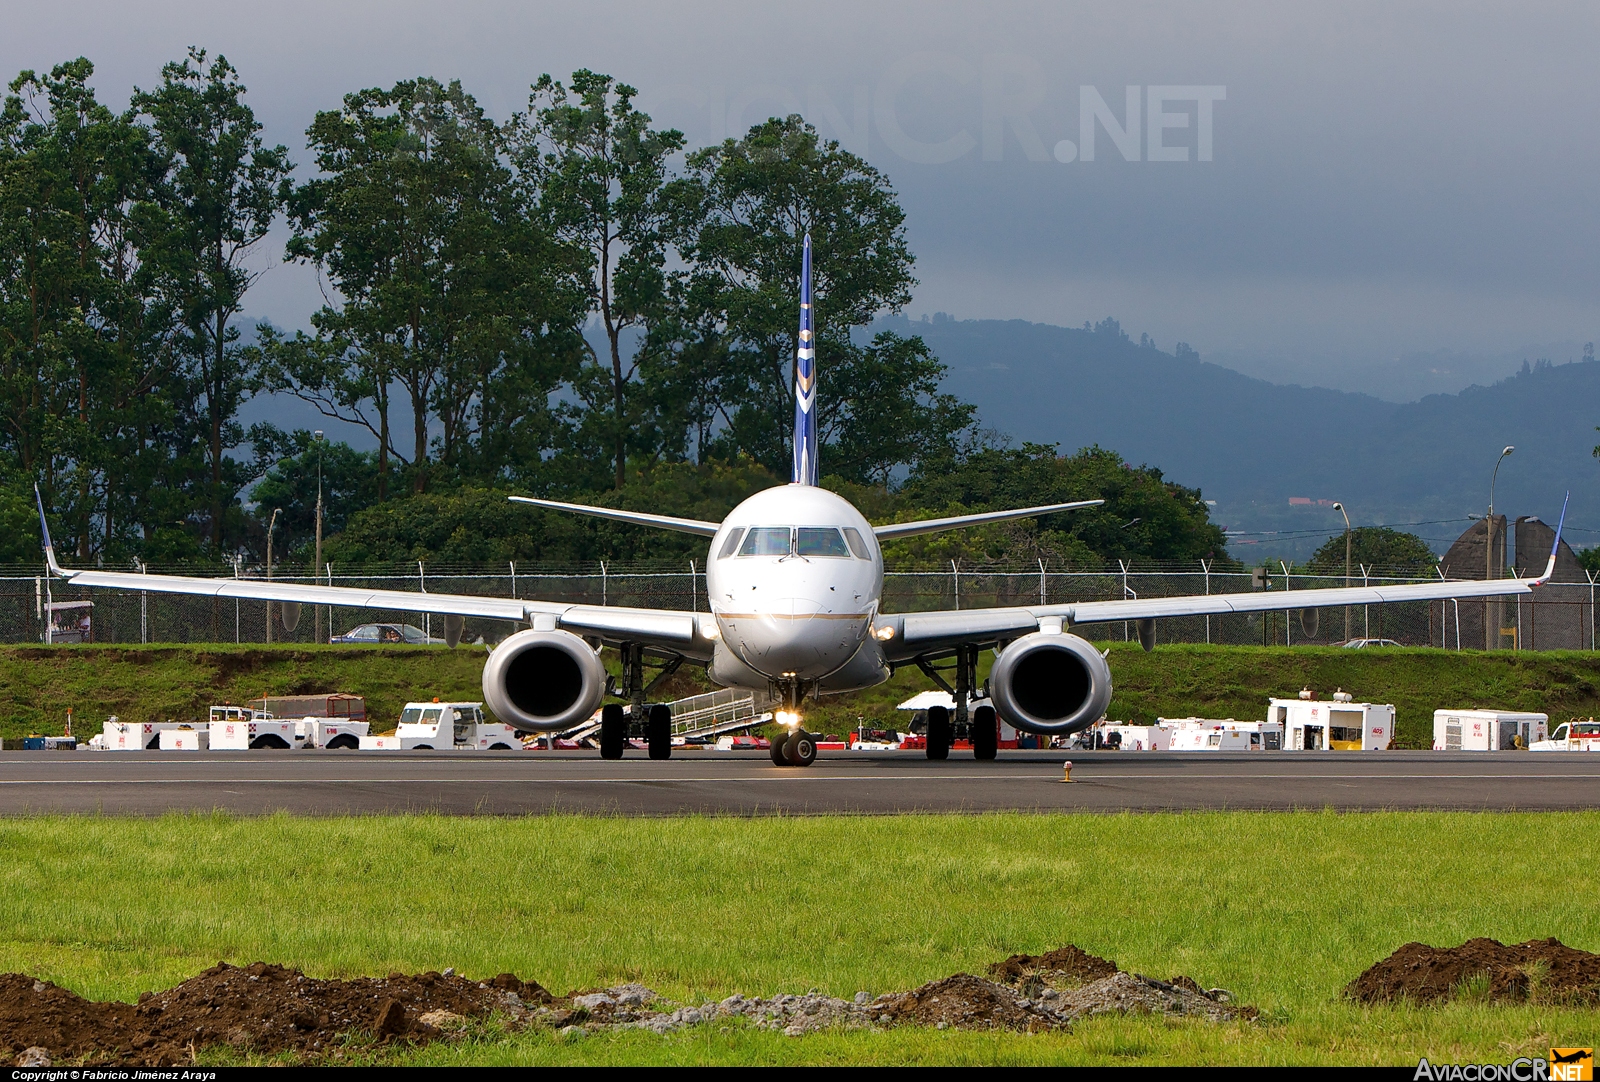 HP-1557CMP - Embraer 190-100AR - Copa Airlines